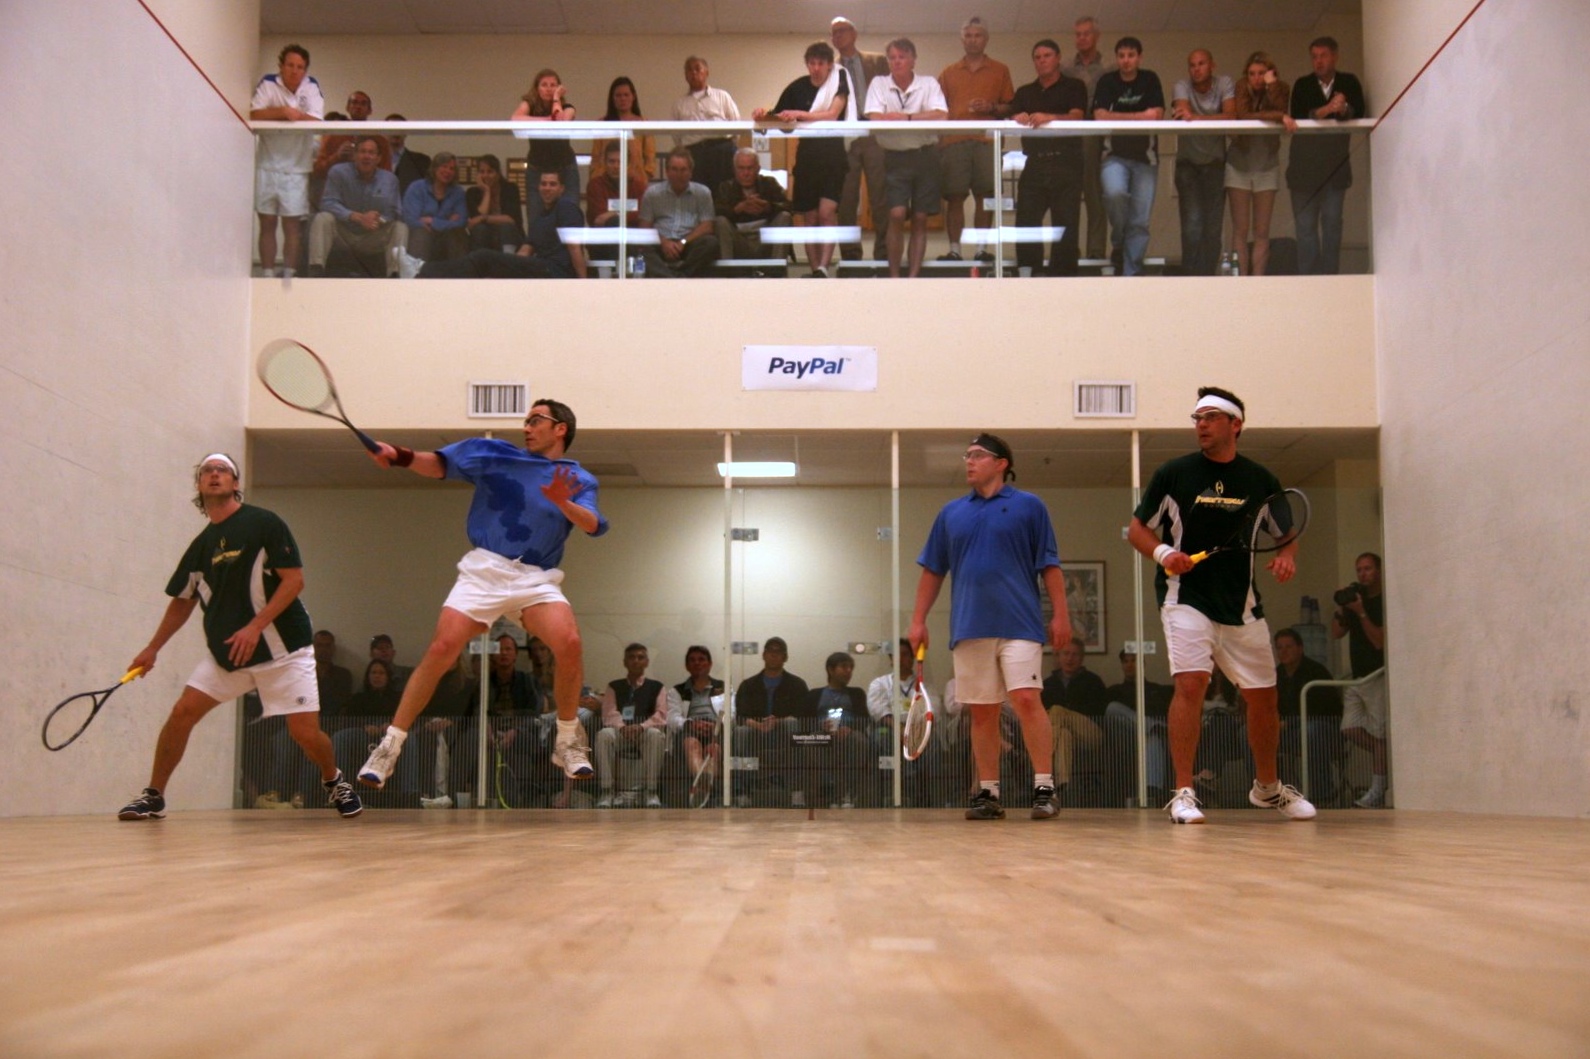 The Australian team of Damien Mudge and Matt Jenson (in green) were seeded No. 2 in the Men’s Open but fell in four-game semifinal to Clive Leach and John Russell.